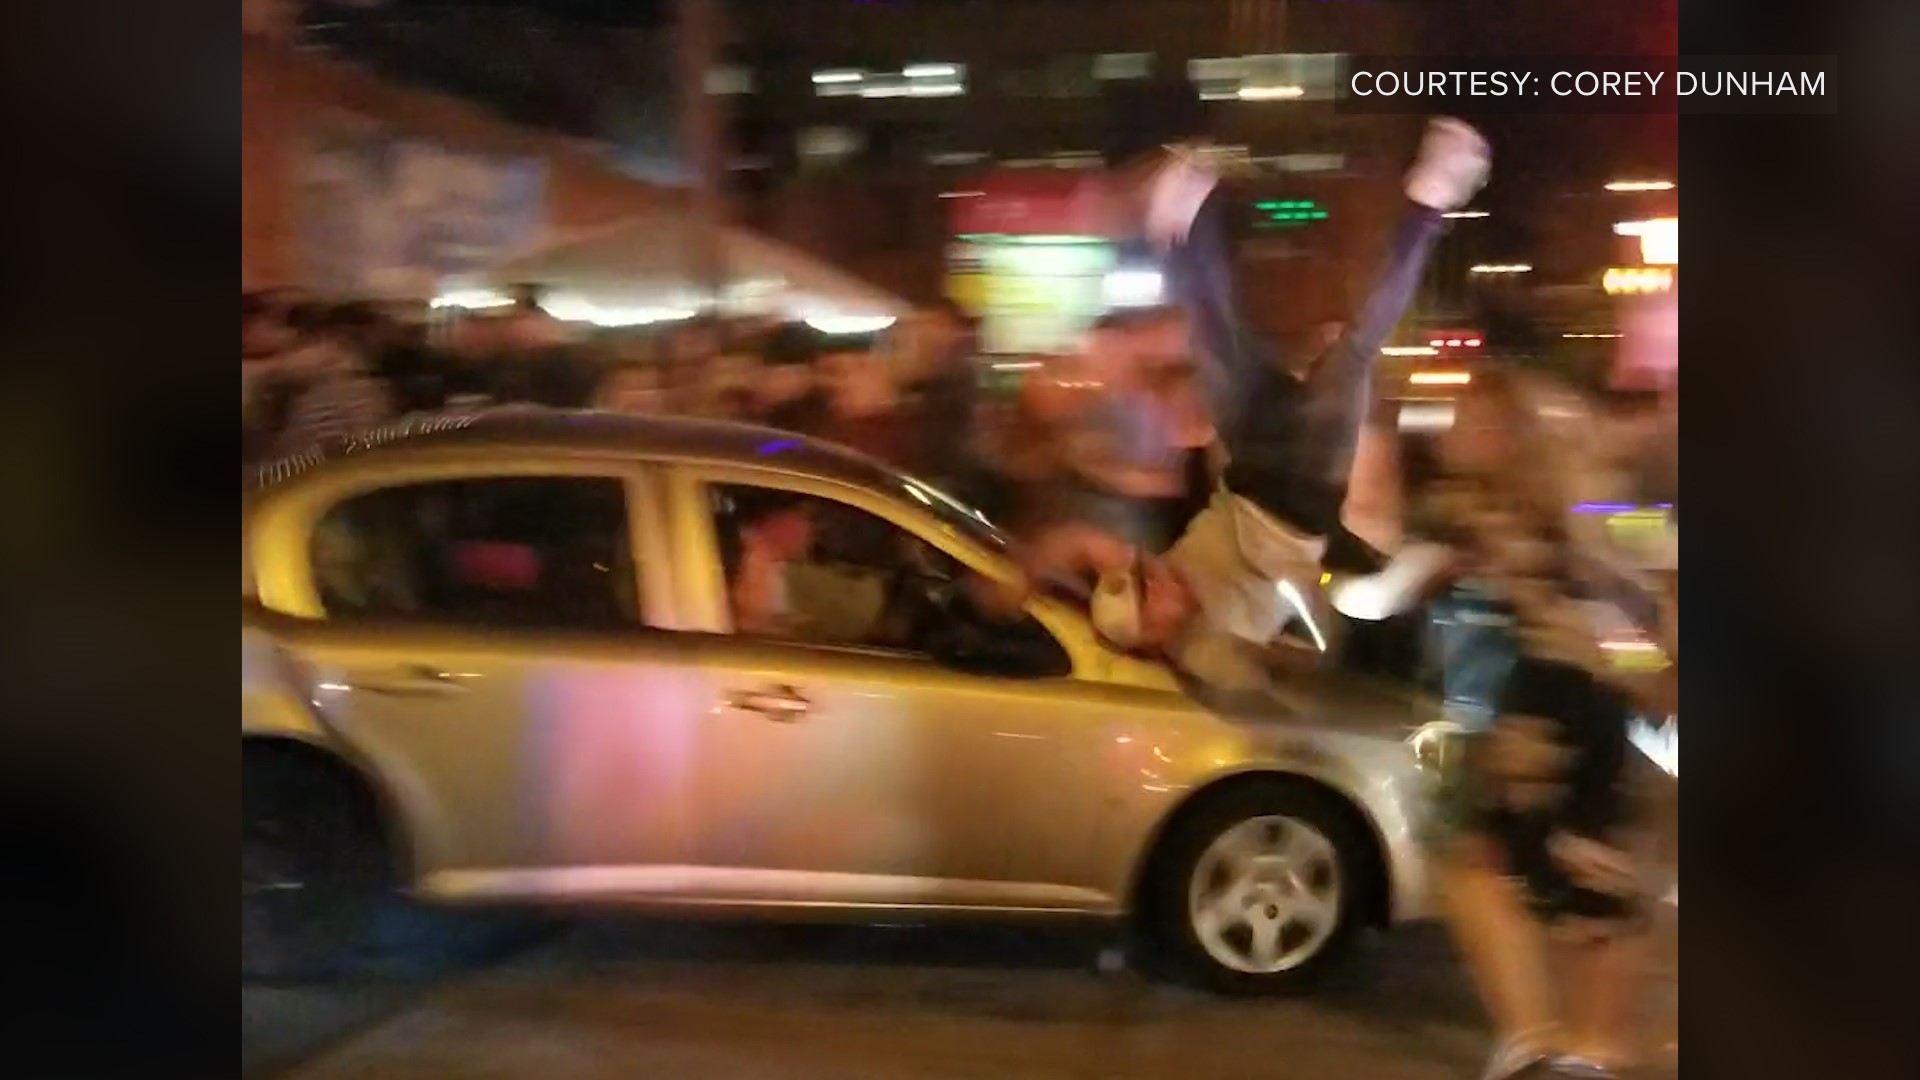 Investigators have identified the suspect in a hit-and-run where a car crashed into two people after a fight broke out in a busy area of Lower Downtown early Sunday morning, according to the Denver Police Department.